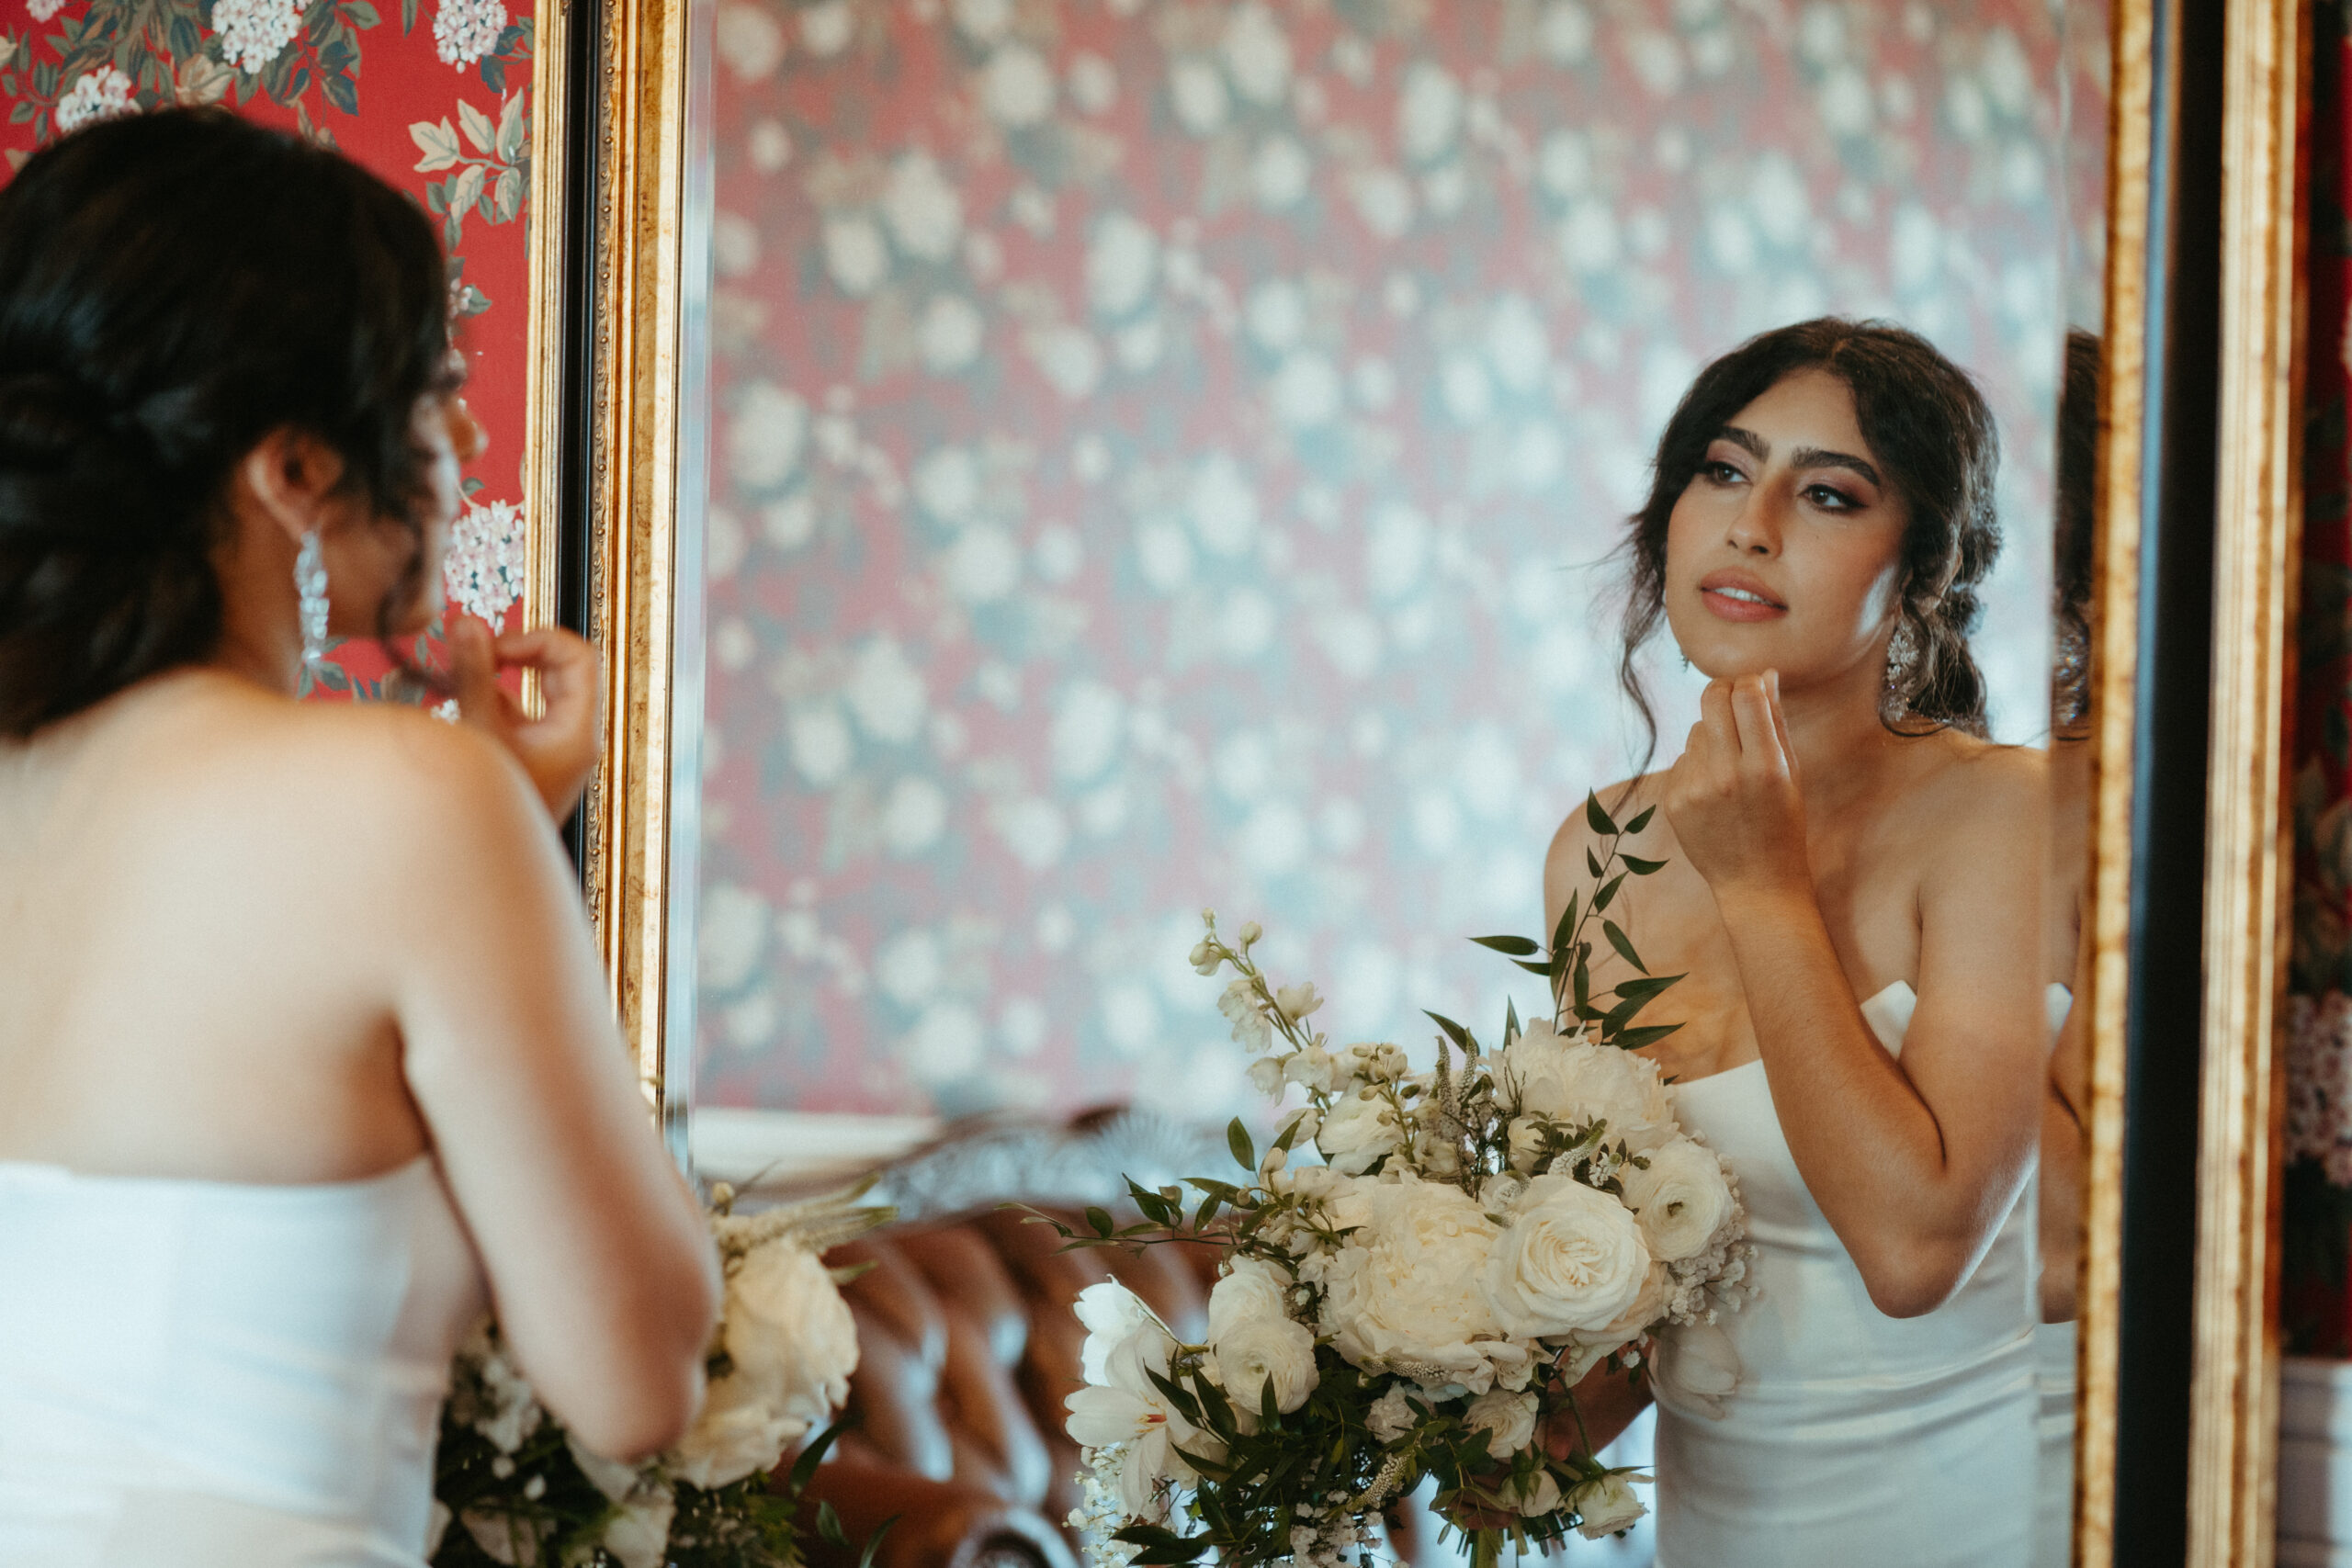 beautiful bride checks her makeup in mirror before walking down the aisle